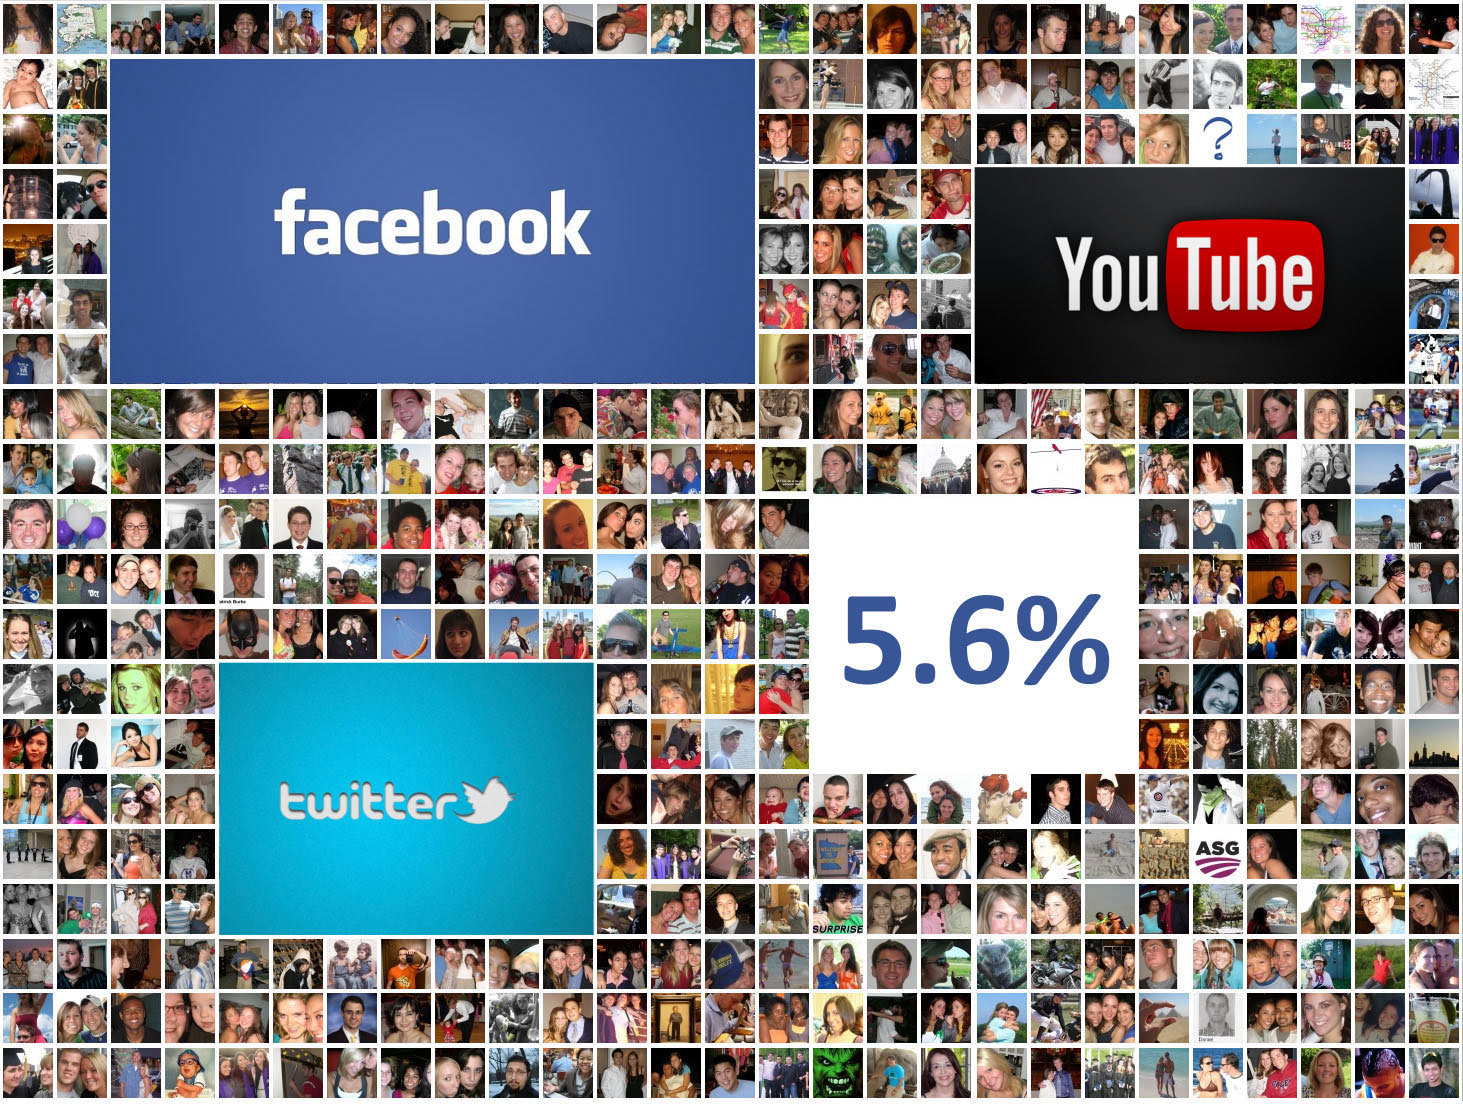 social customers contribute 5.6% more to business bottom line